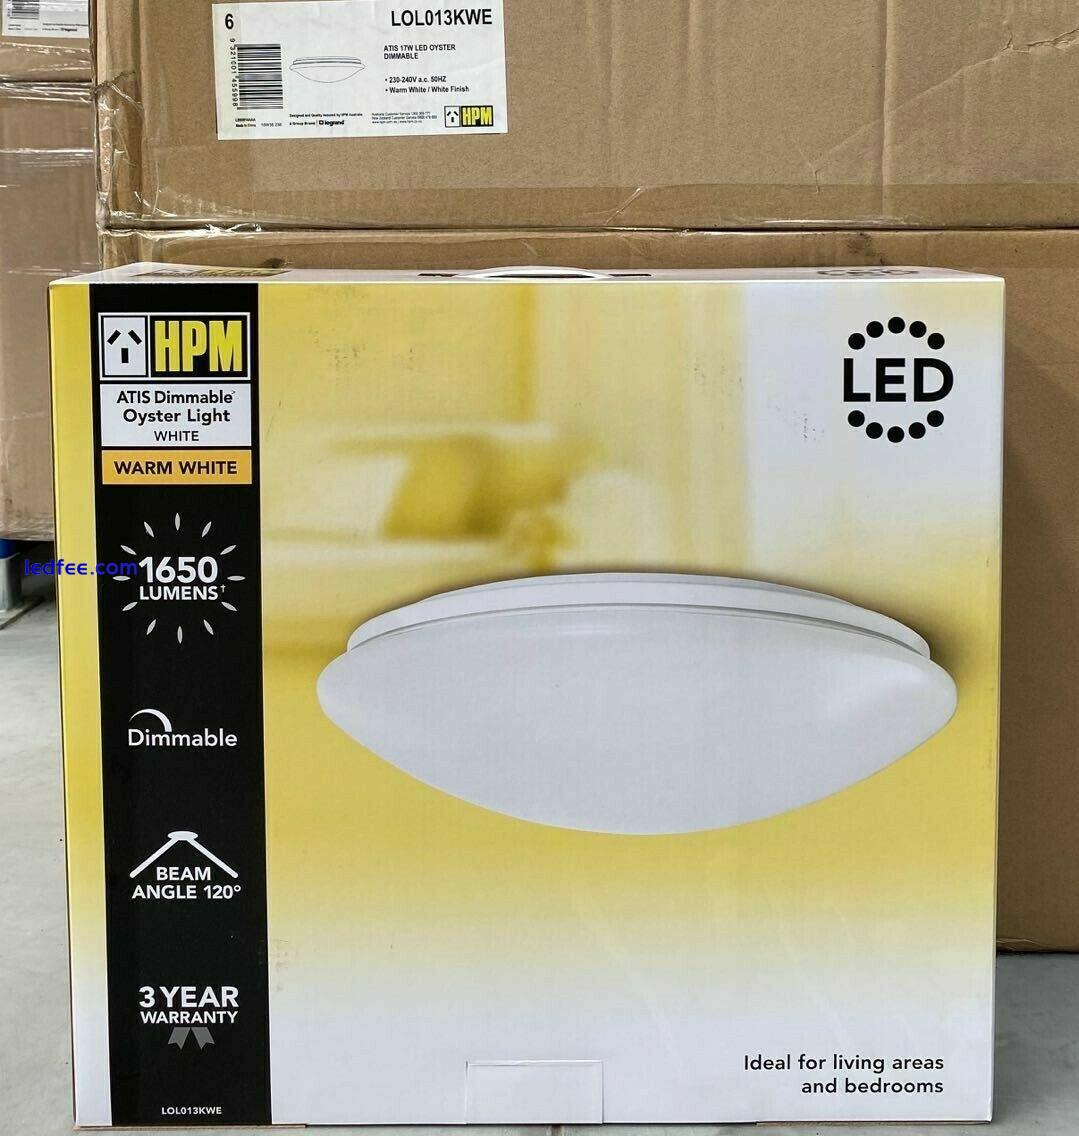 HPM LED Dimmable Ceiling Oyster Light NEW 0 